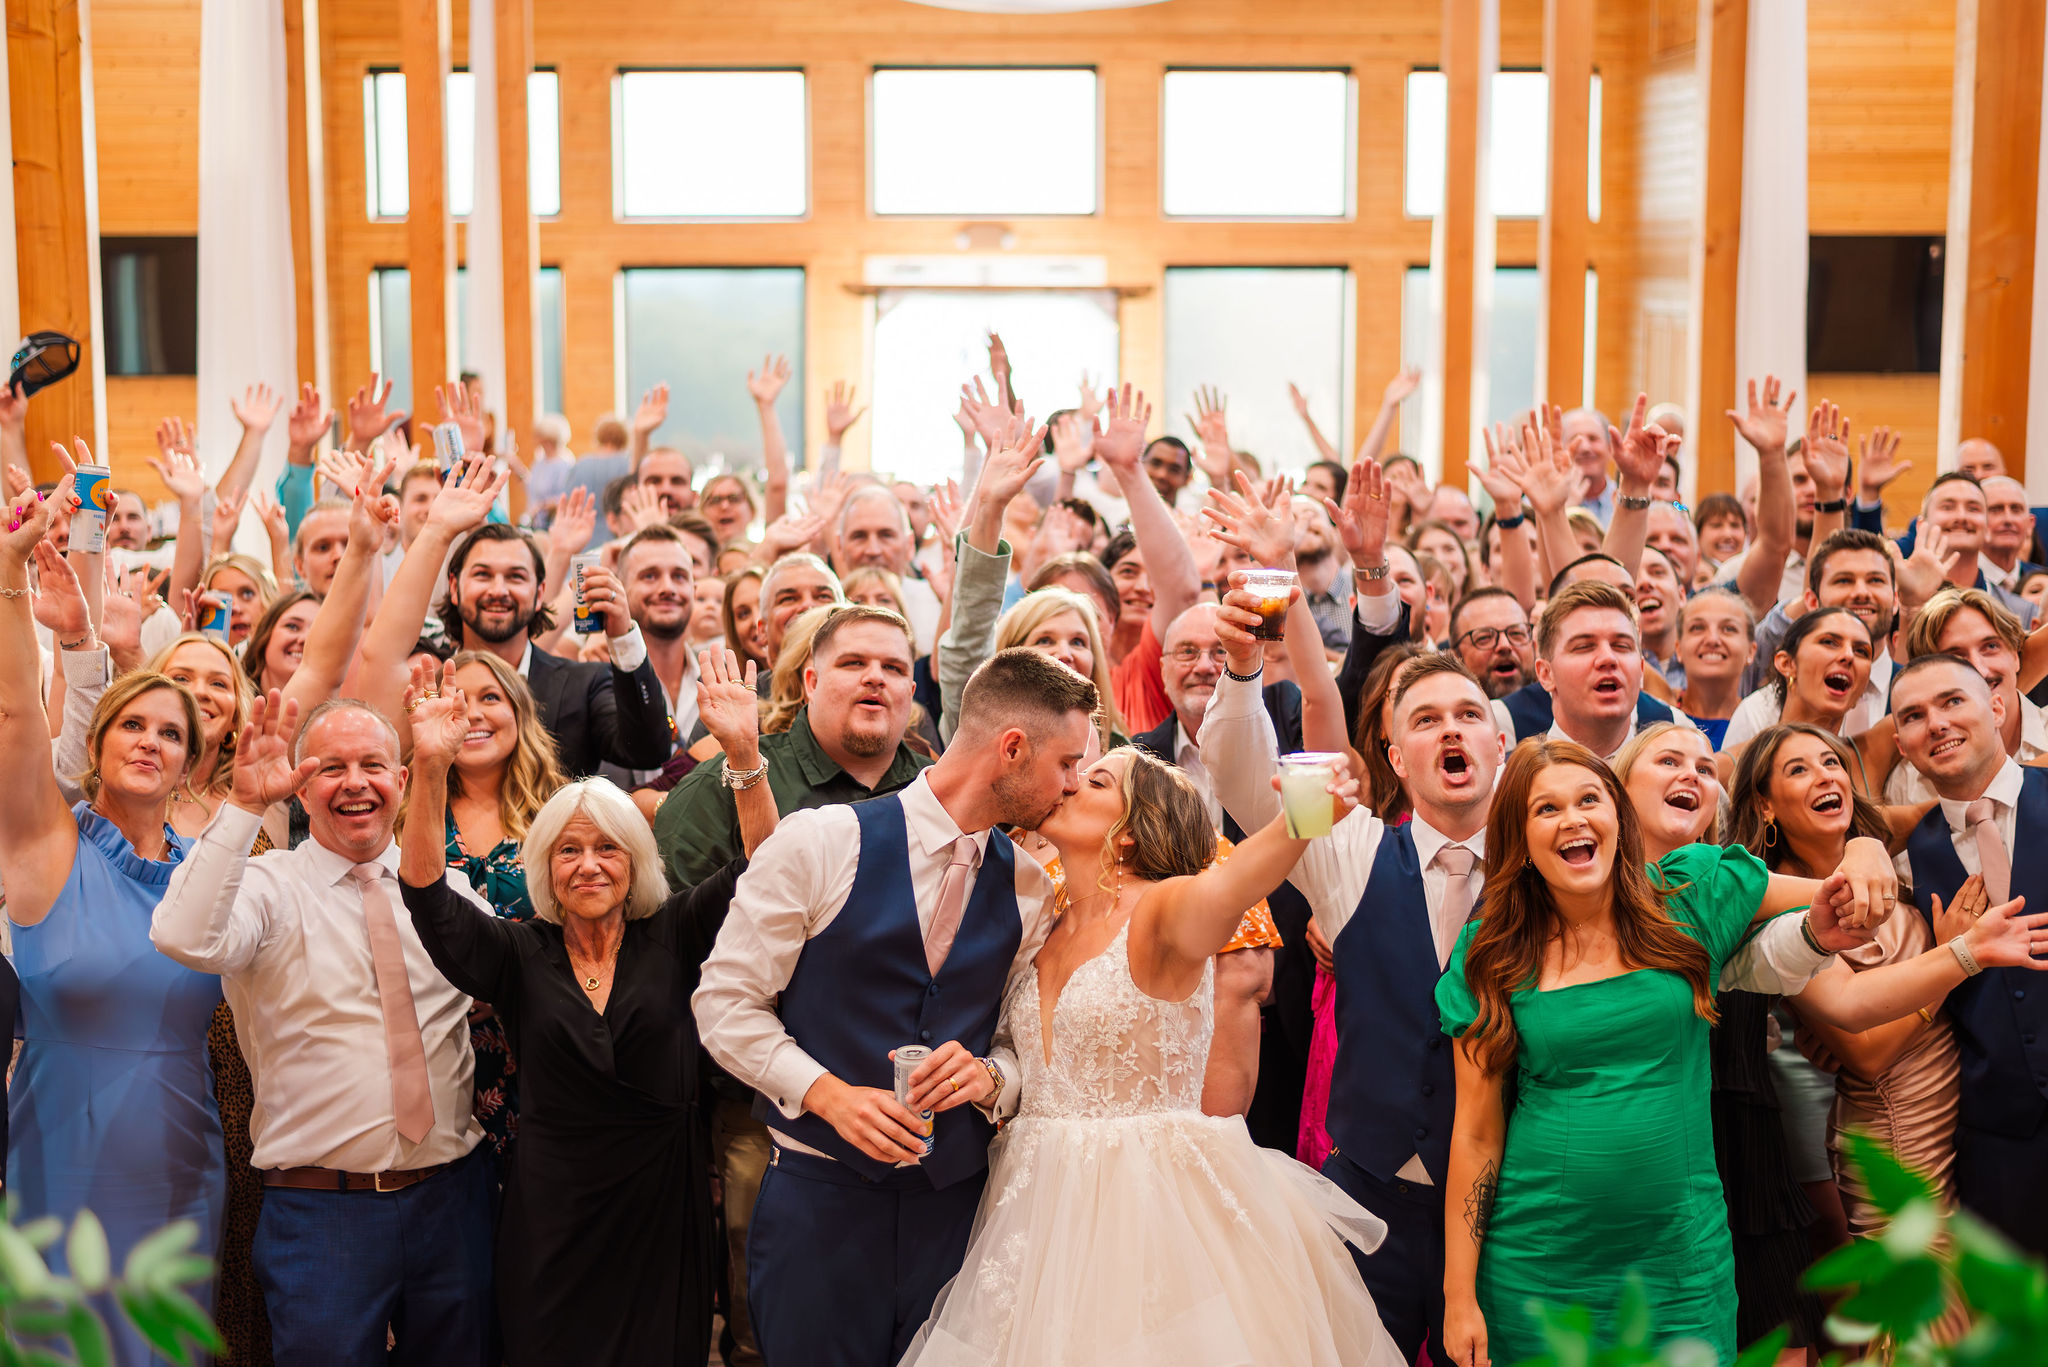 bride and groom kissing in the middle surrounded by guests to create a selfie like image